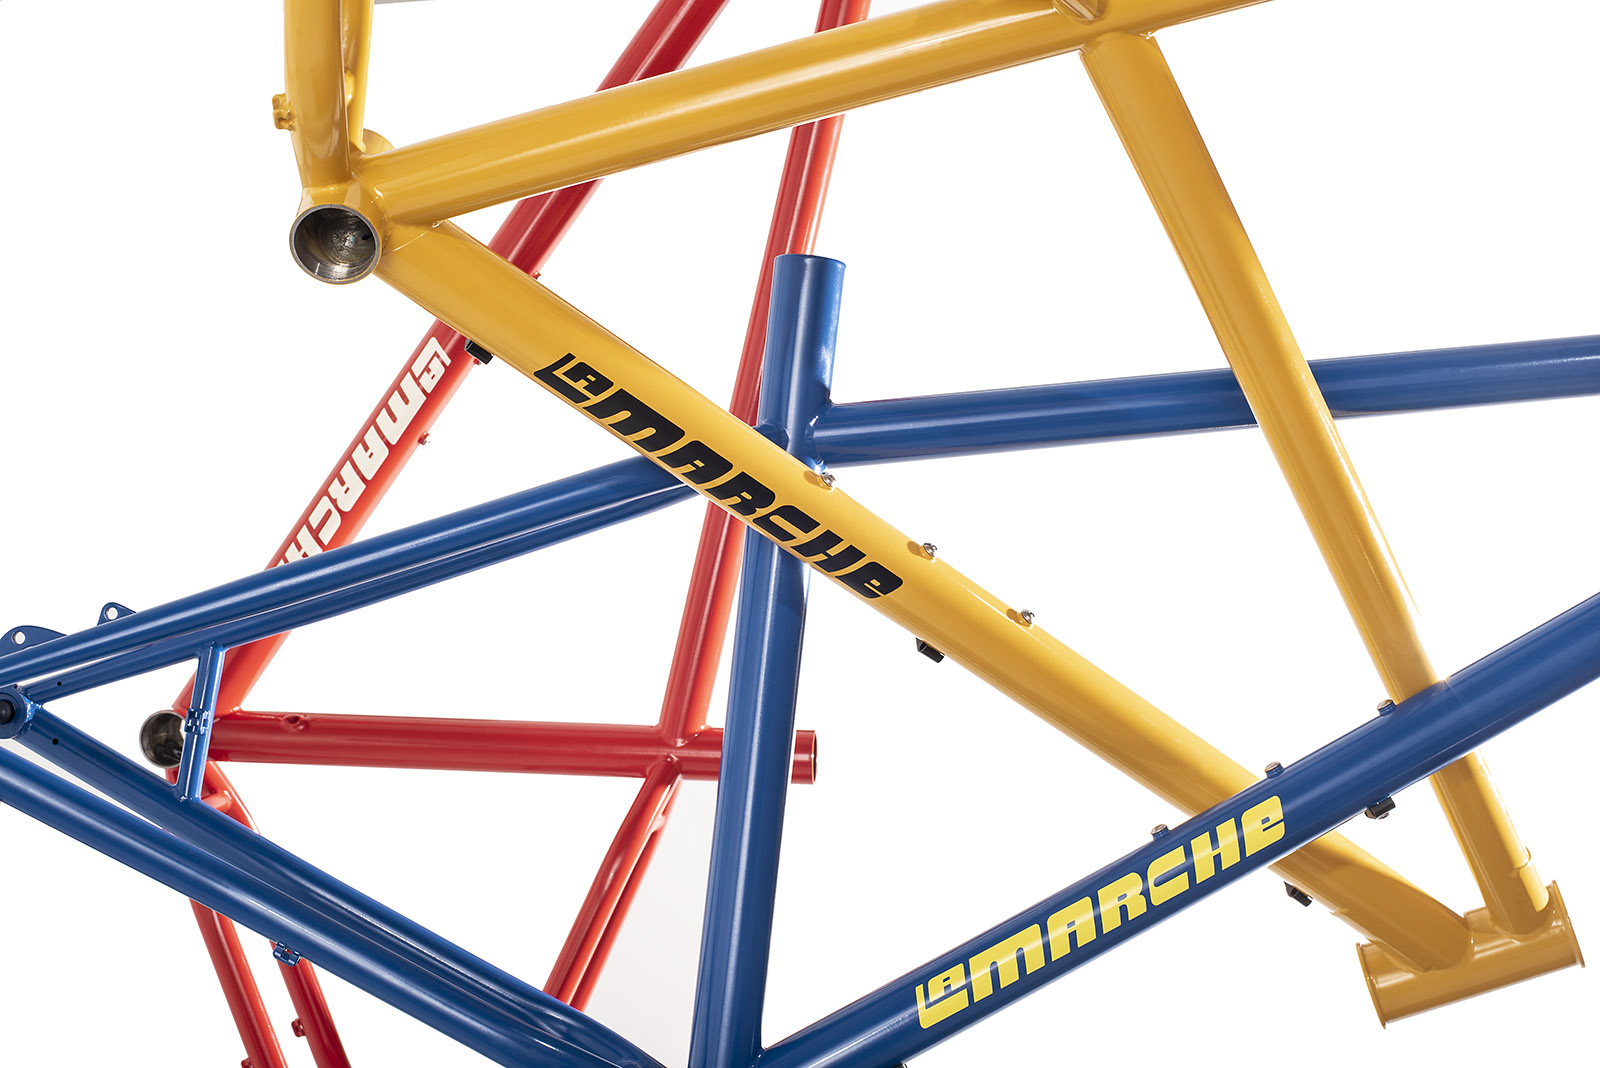 a collection of bike frames of different colors against a white background